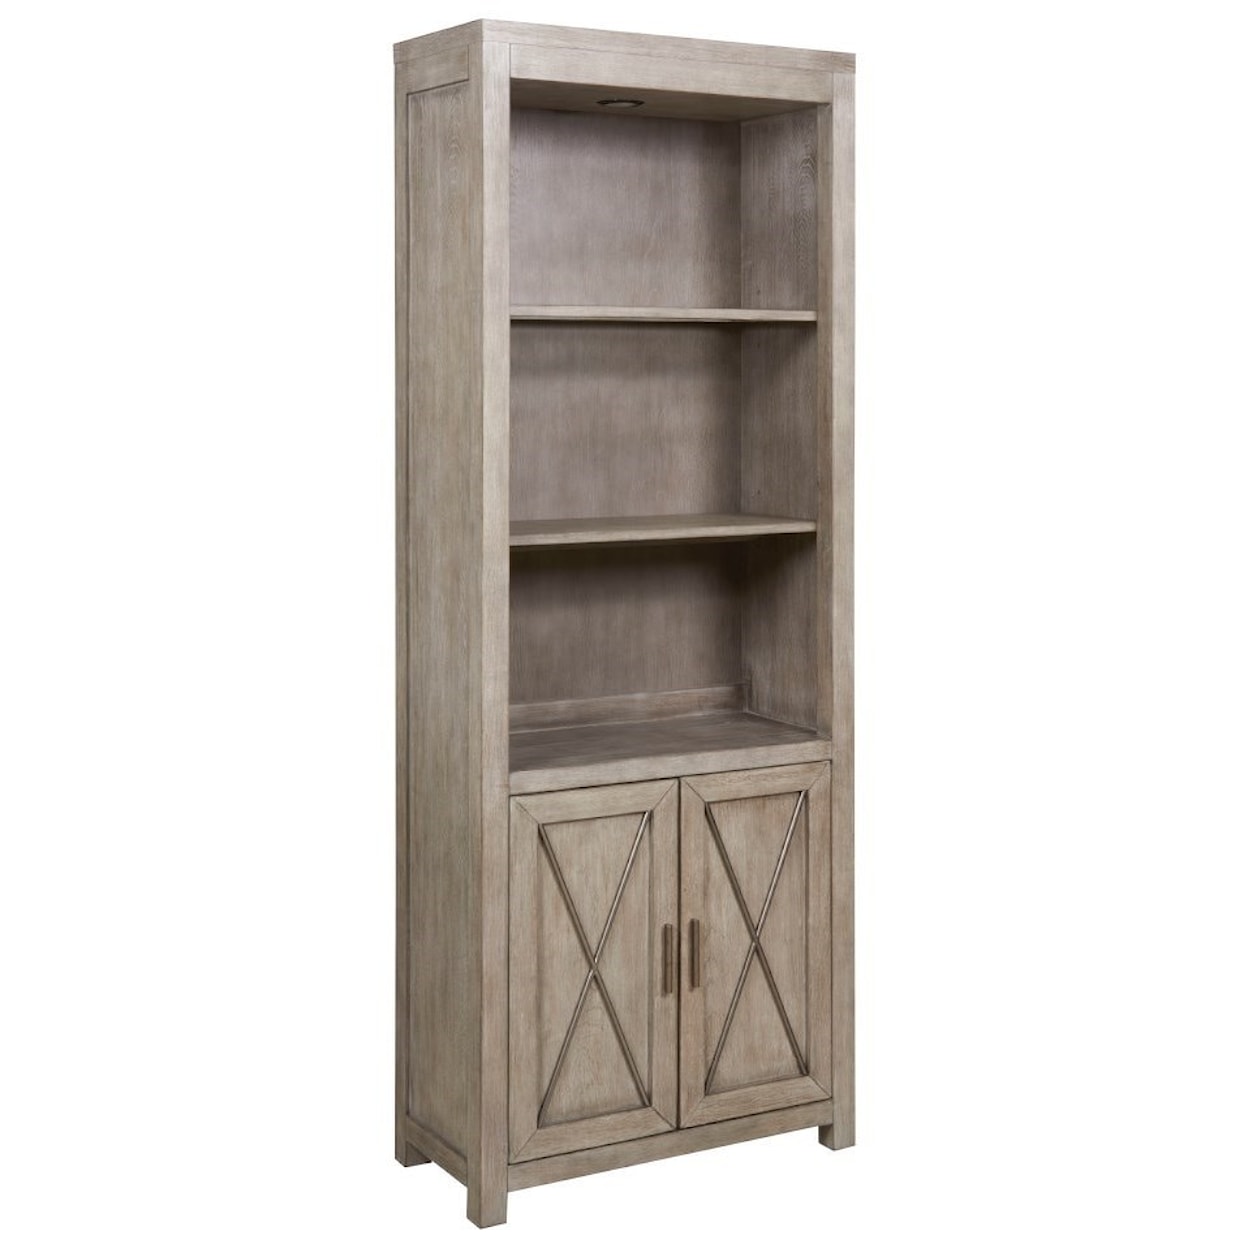 Hammary West End Entertainment Wall Unit